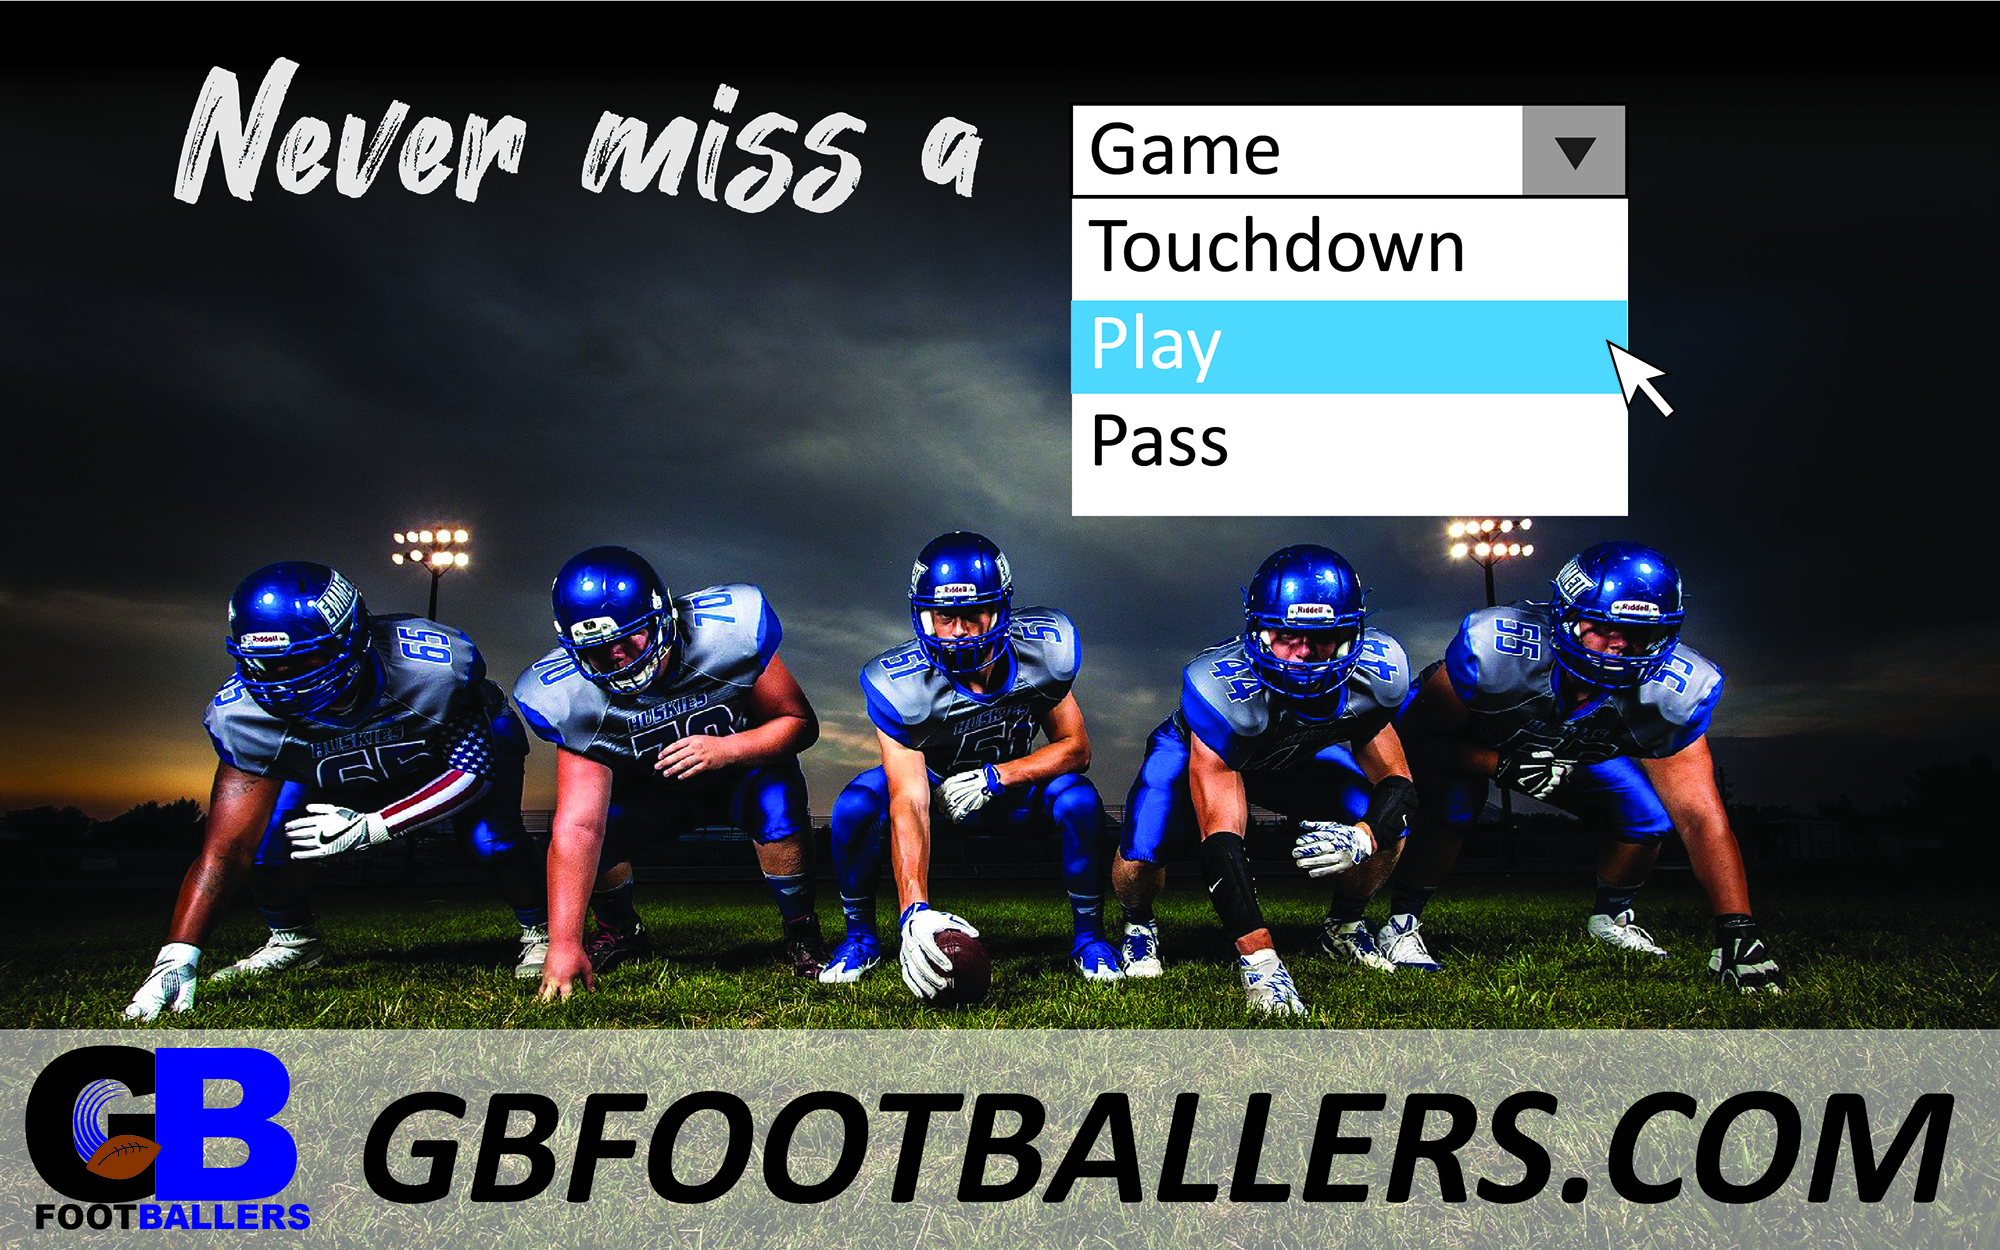 <b>Gold Beach Footballers Billboard</b><br><i>Created using Illustrator.</i><br>This billboard was designed to grab your attention and communicate this team's new web address in the time it takes to glance away from the road.